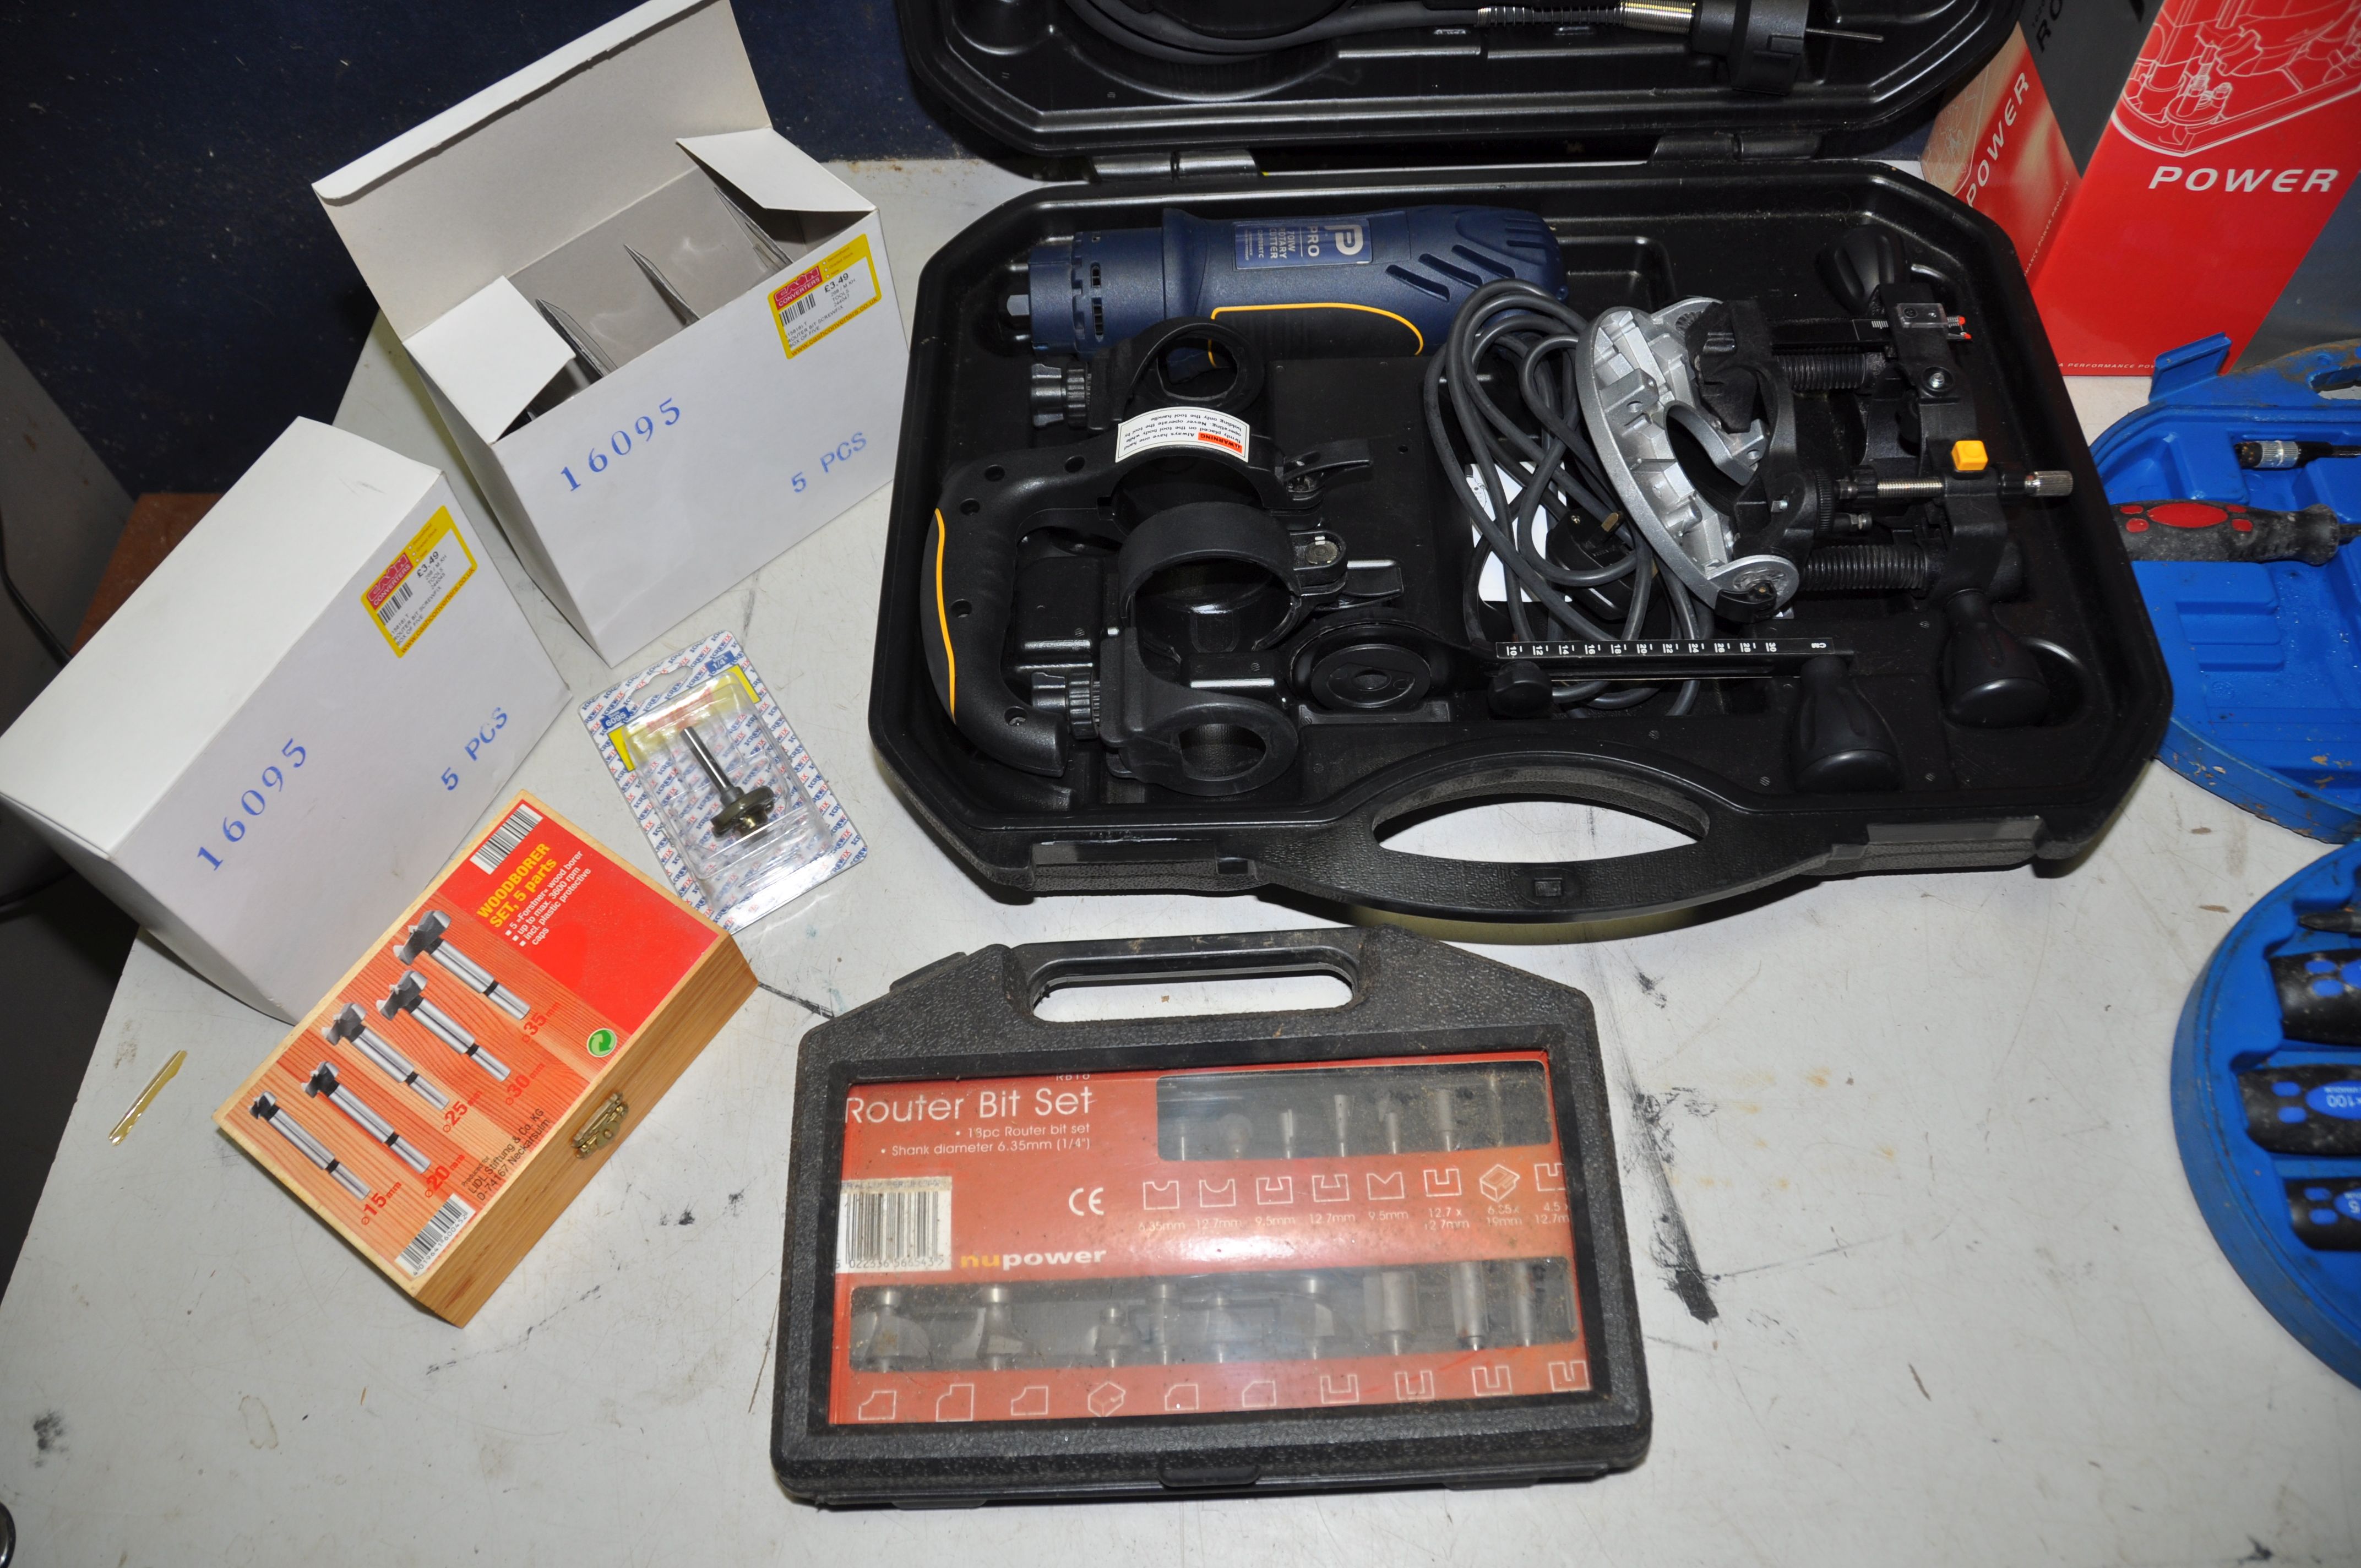 A PERFORMANCE POWER PRO CLM700RTC ROTARY CUTTER in original case with accessories along with a - Image 3 of 4